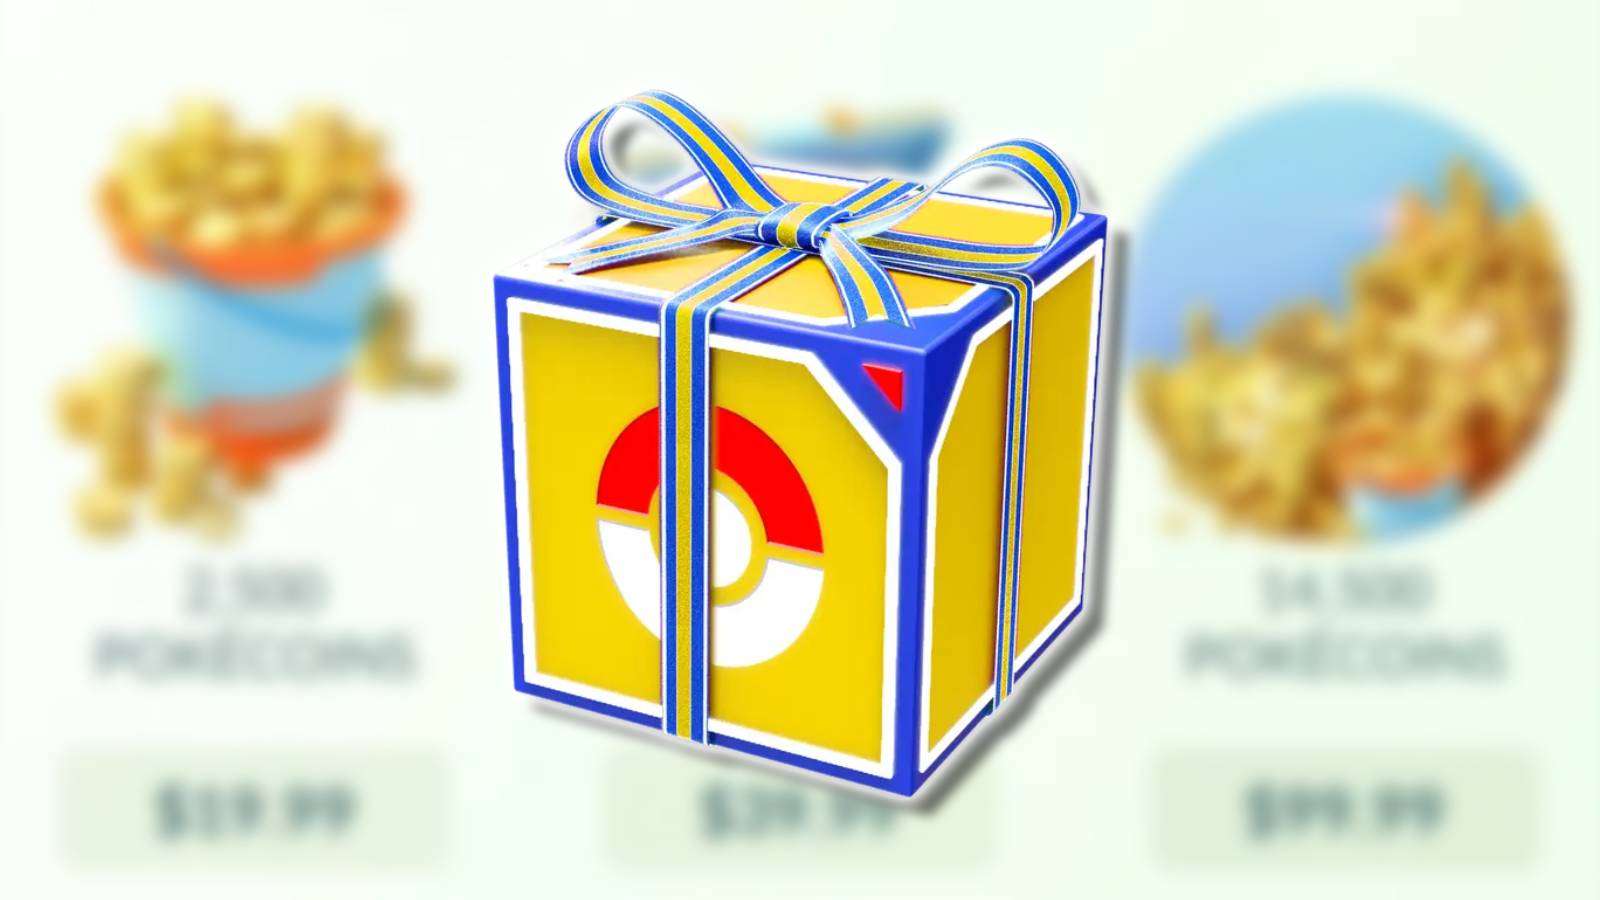 A Pokemon Go Item Bundle Box is visible with a ribbon wrapped around it